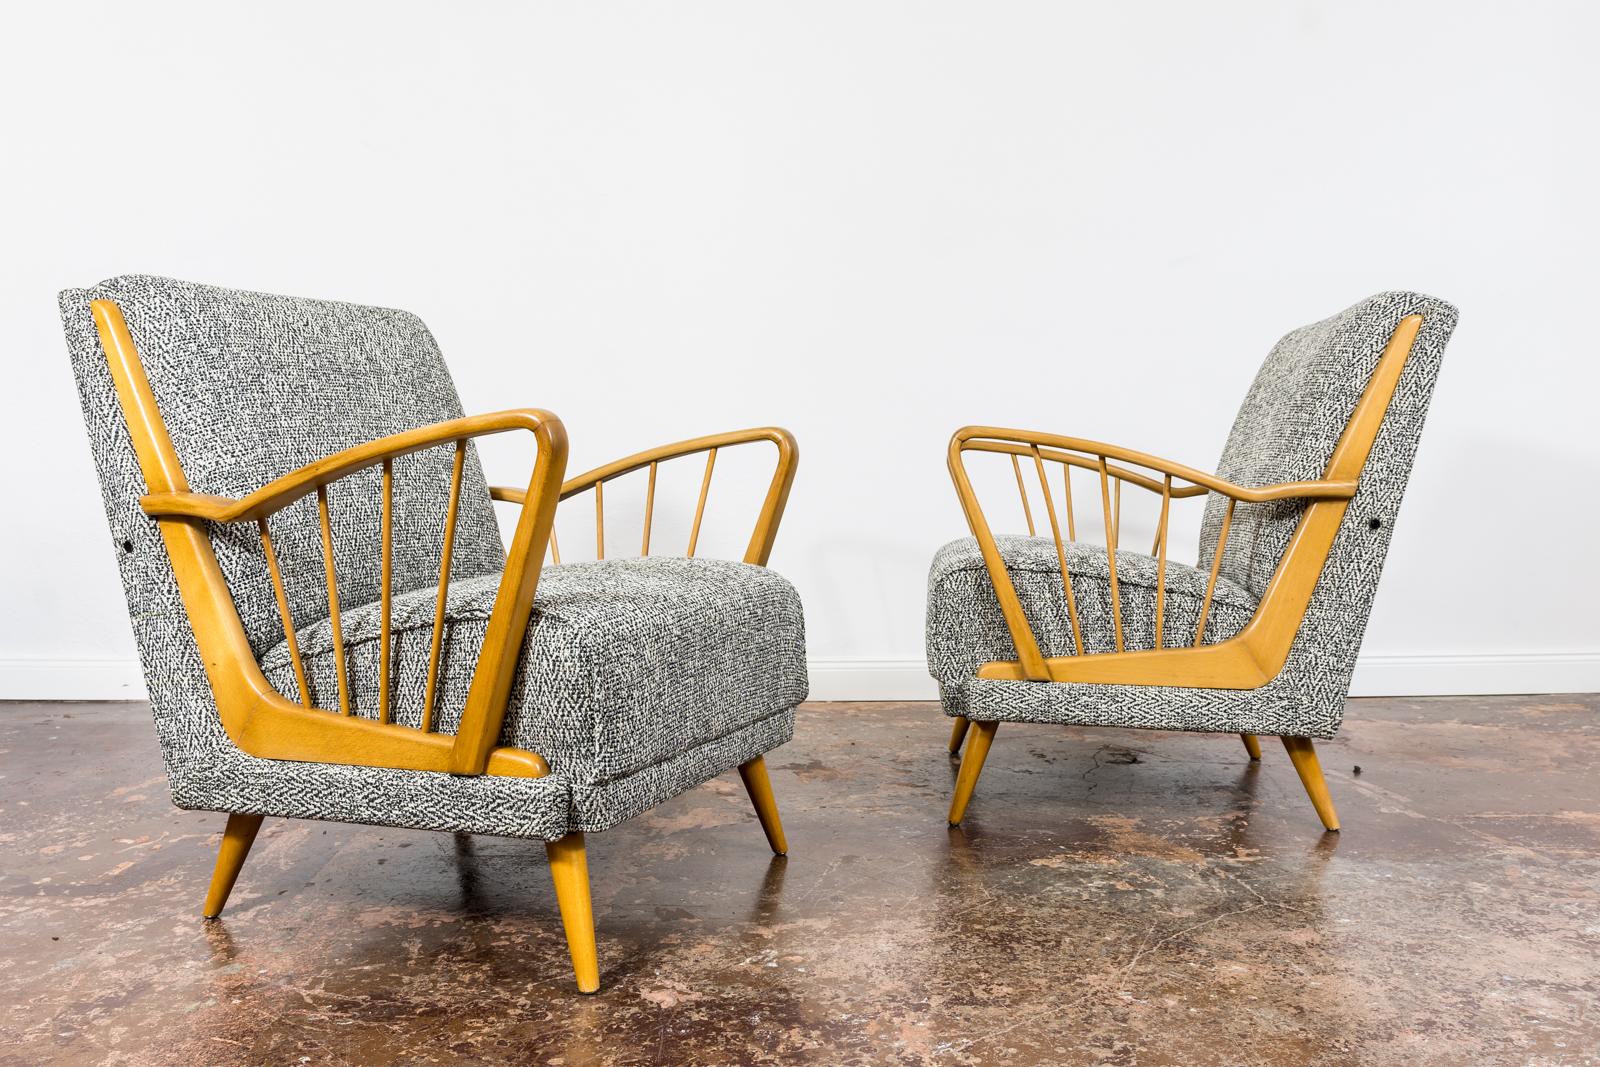 Pair Of Mid-Century Armchairs, 1950's, Germany For Sale 4